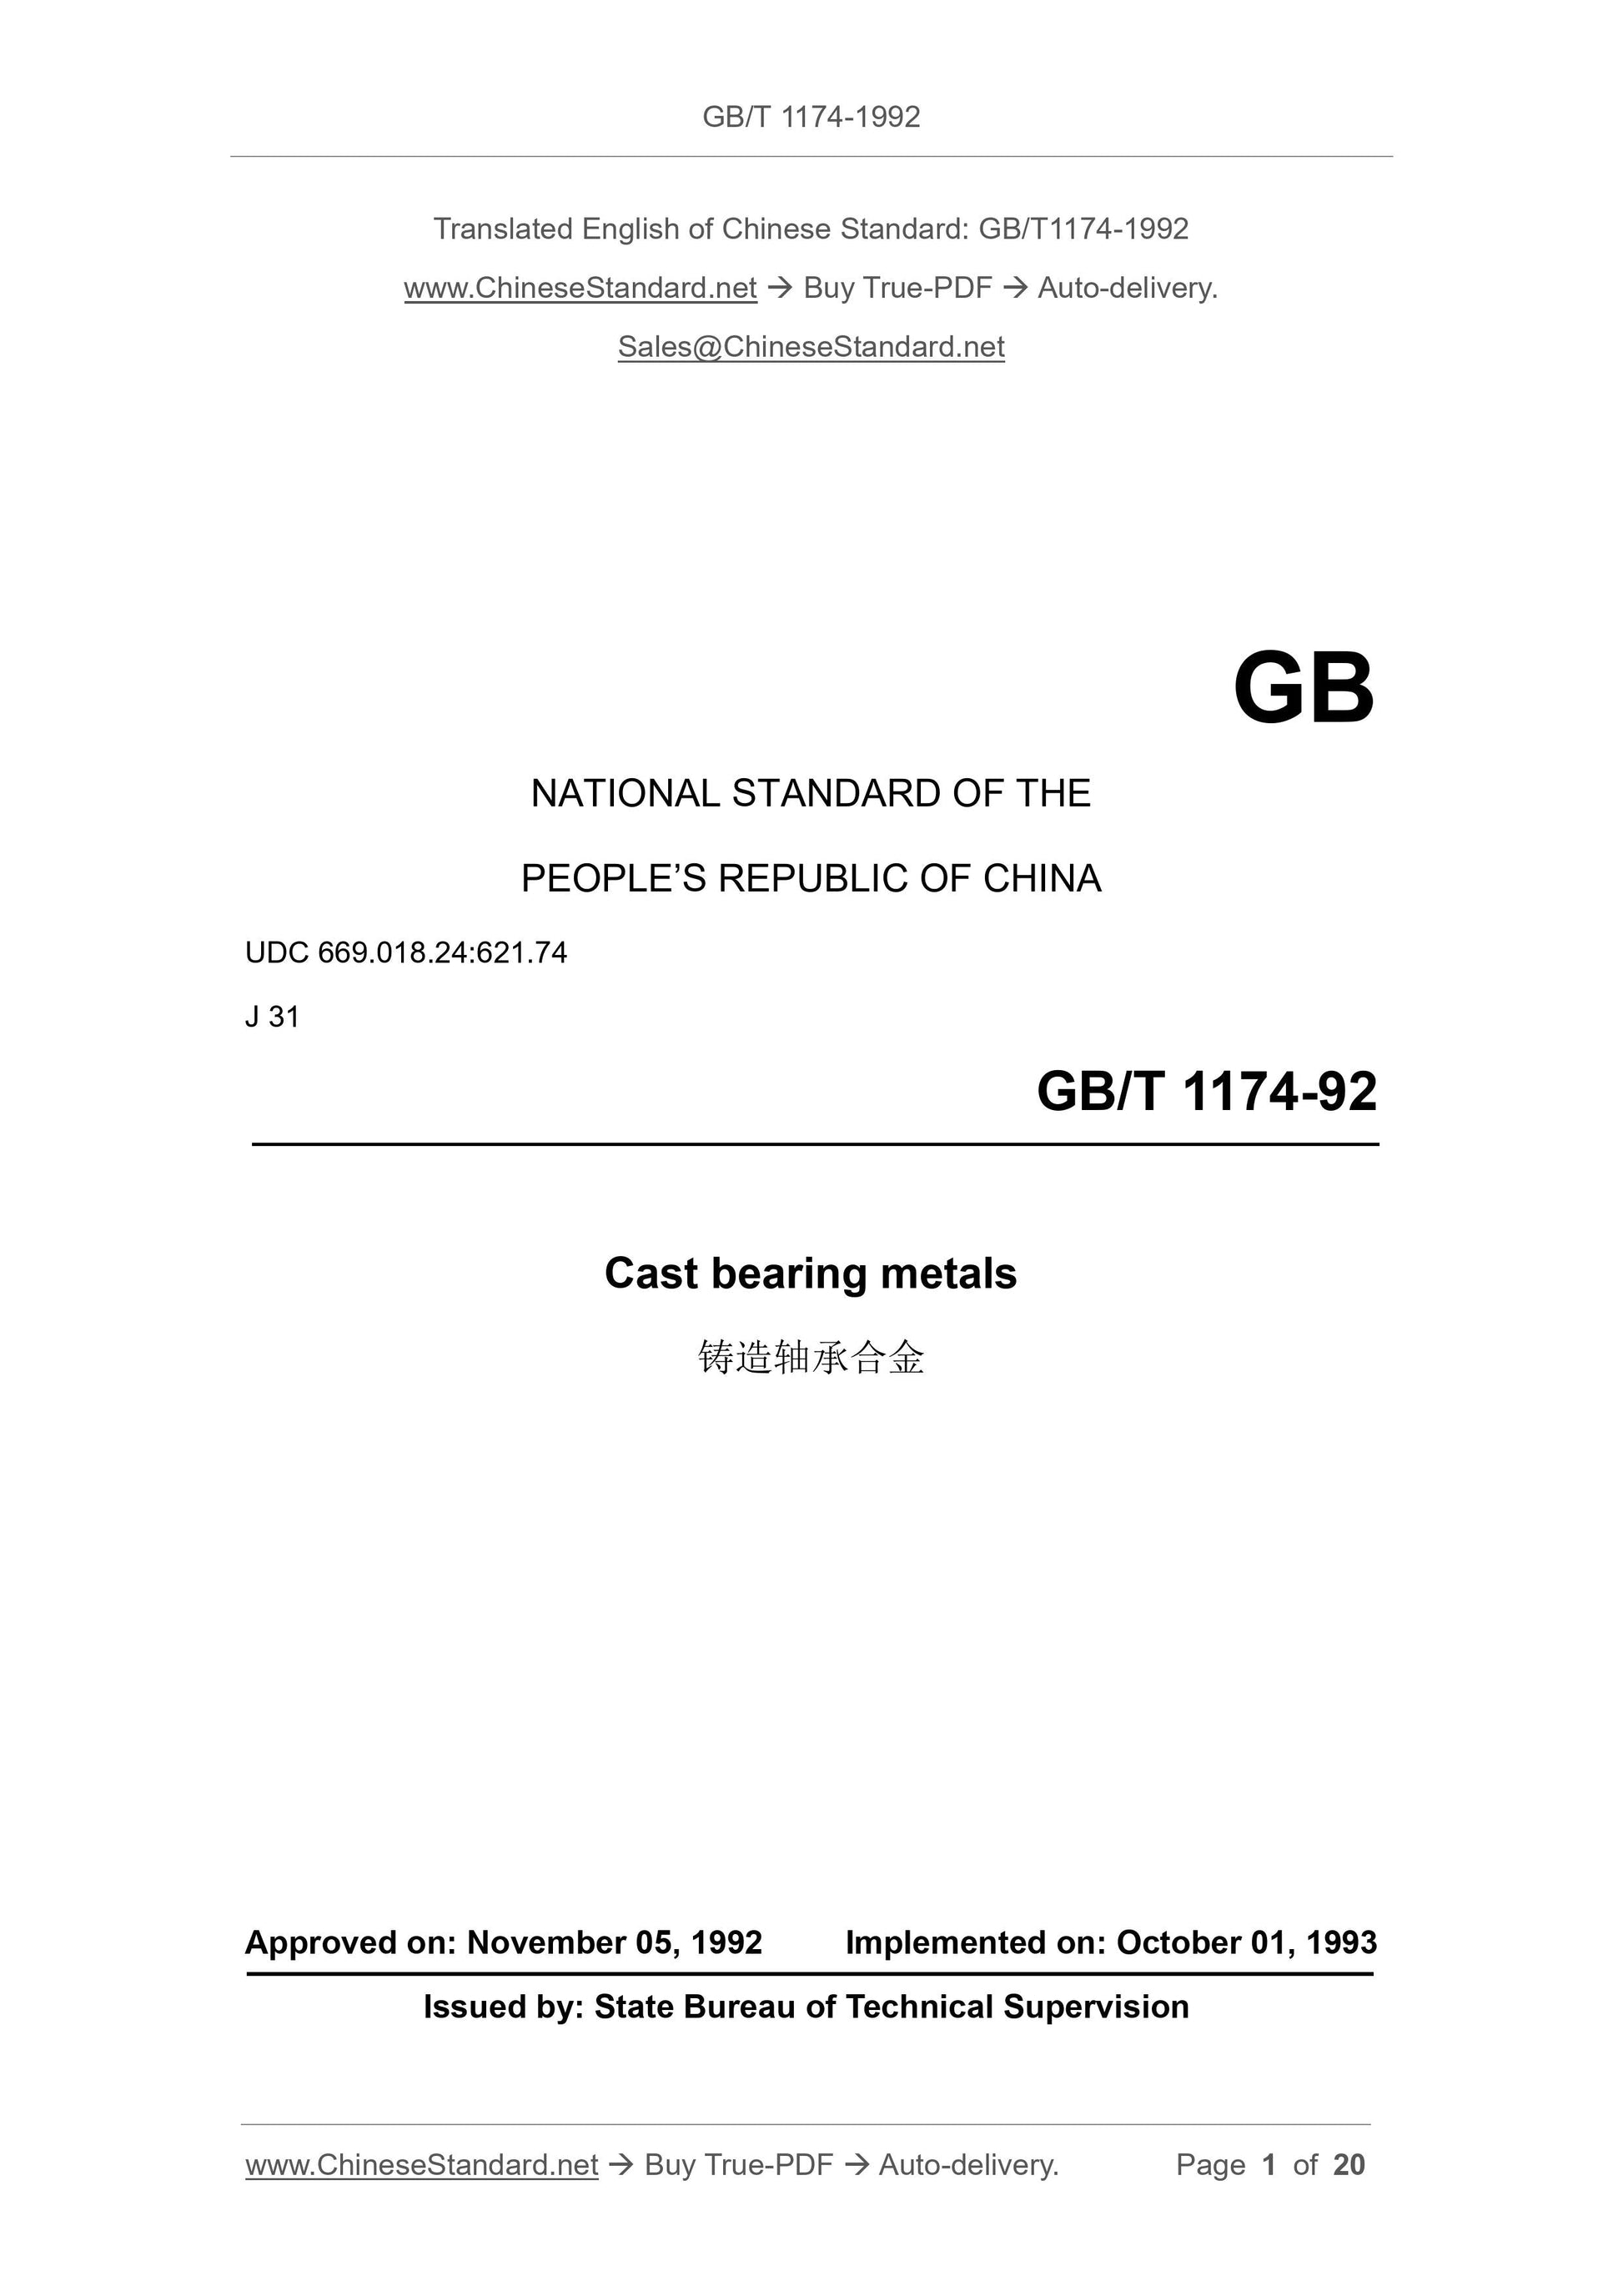 GB/T 1174-1992 Page 1